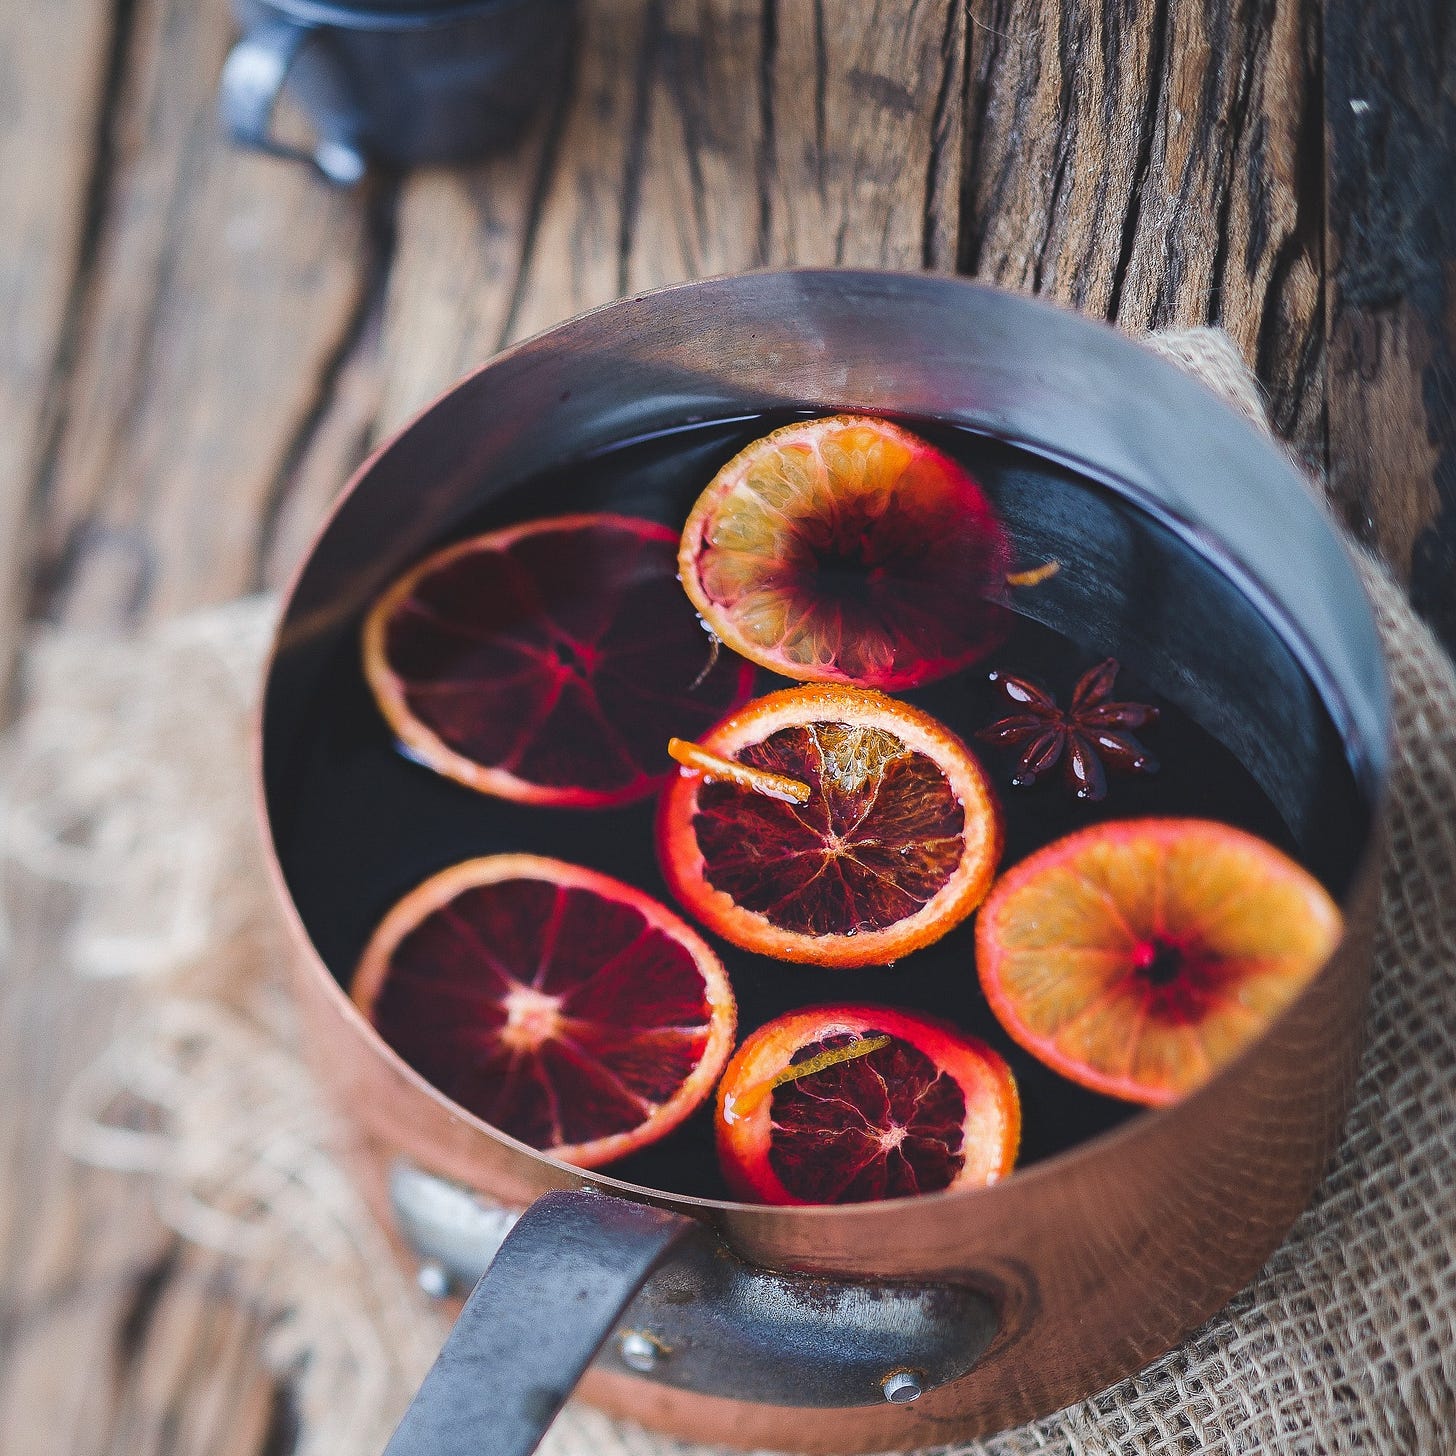 A pan of wine mulling with spices and slices of orange.